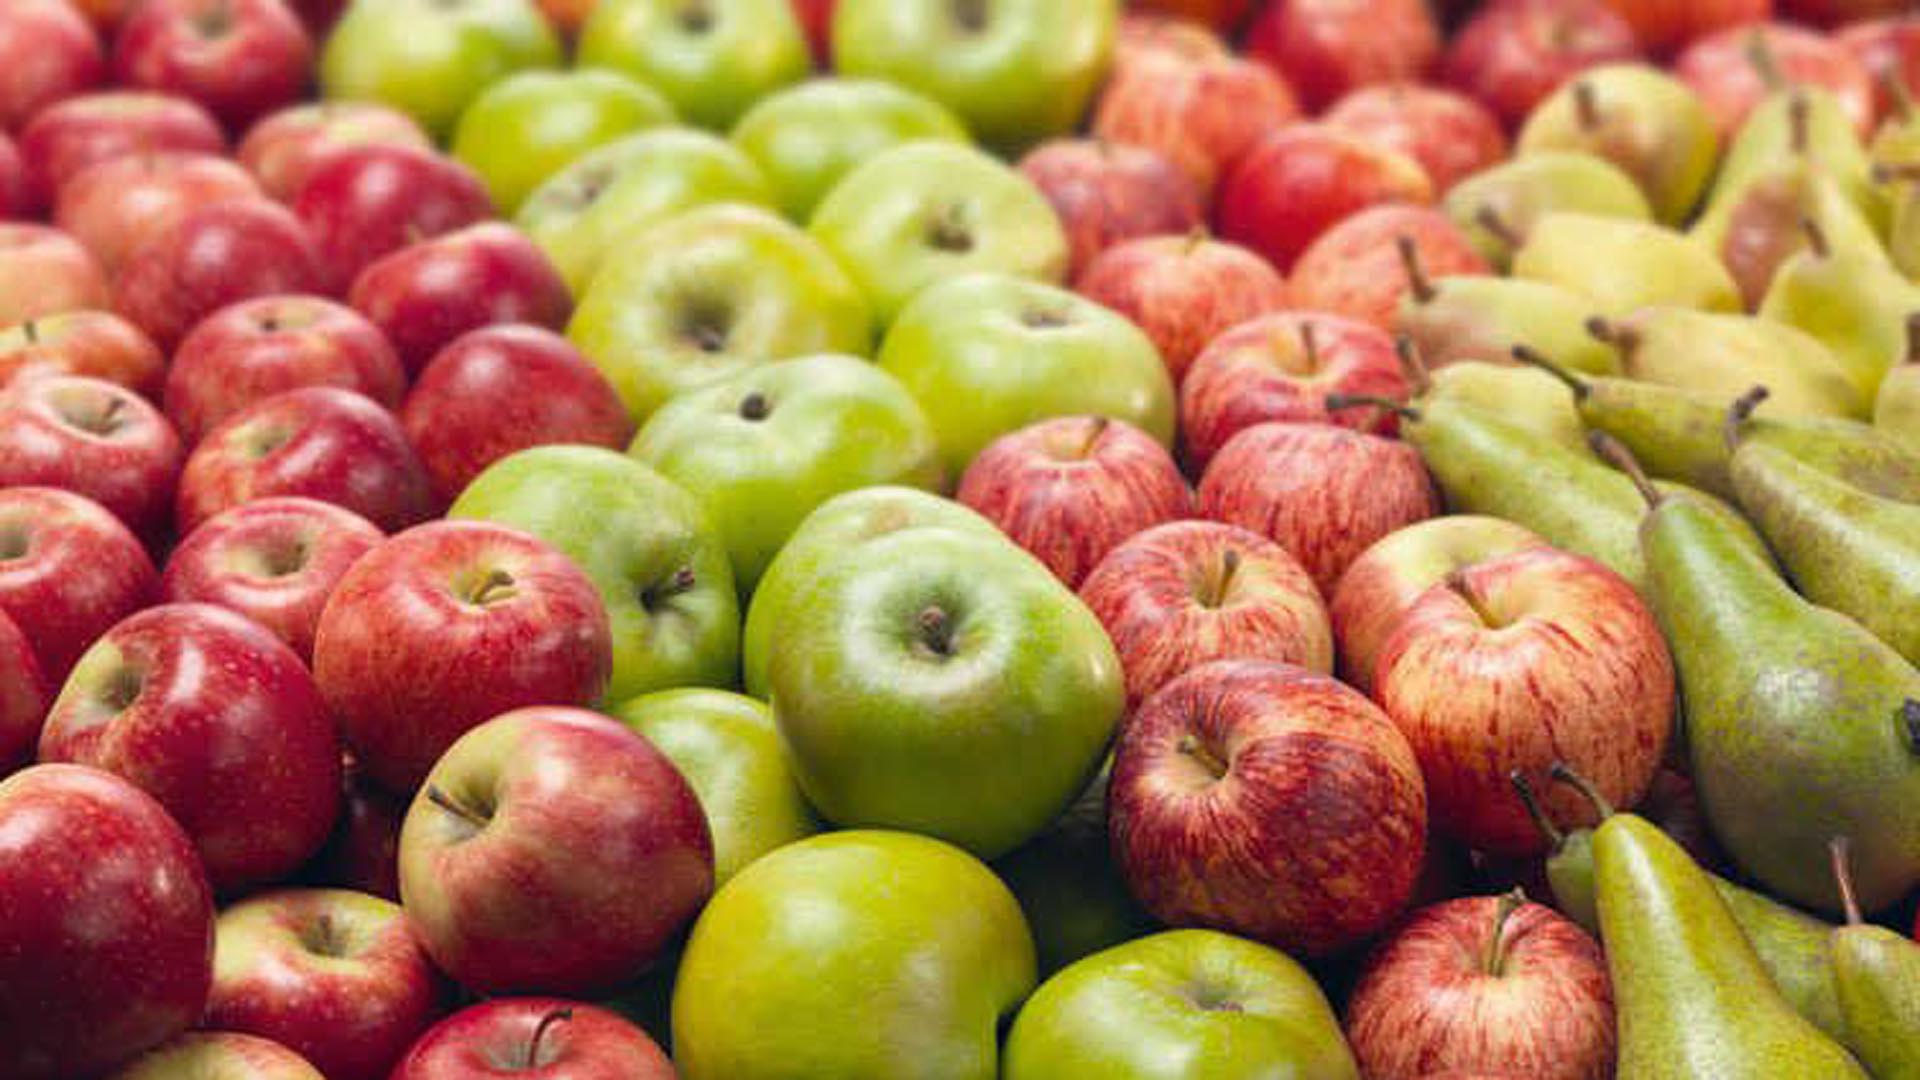 Apples and pears, two of the regional agricultural products that lost competitiveness